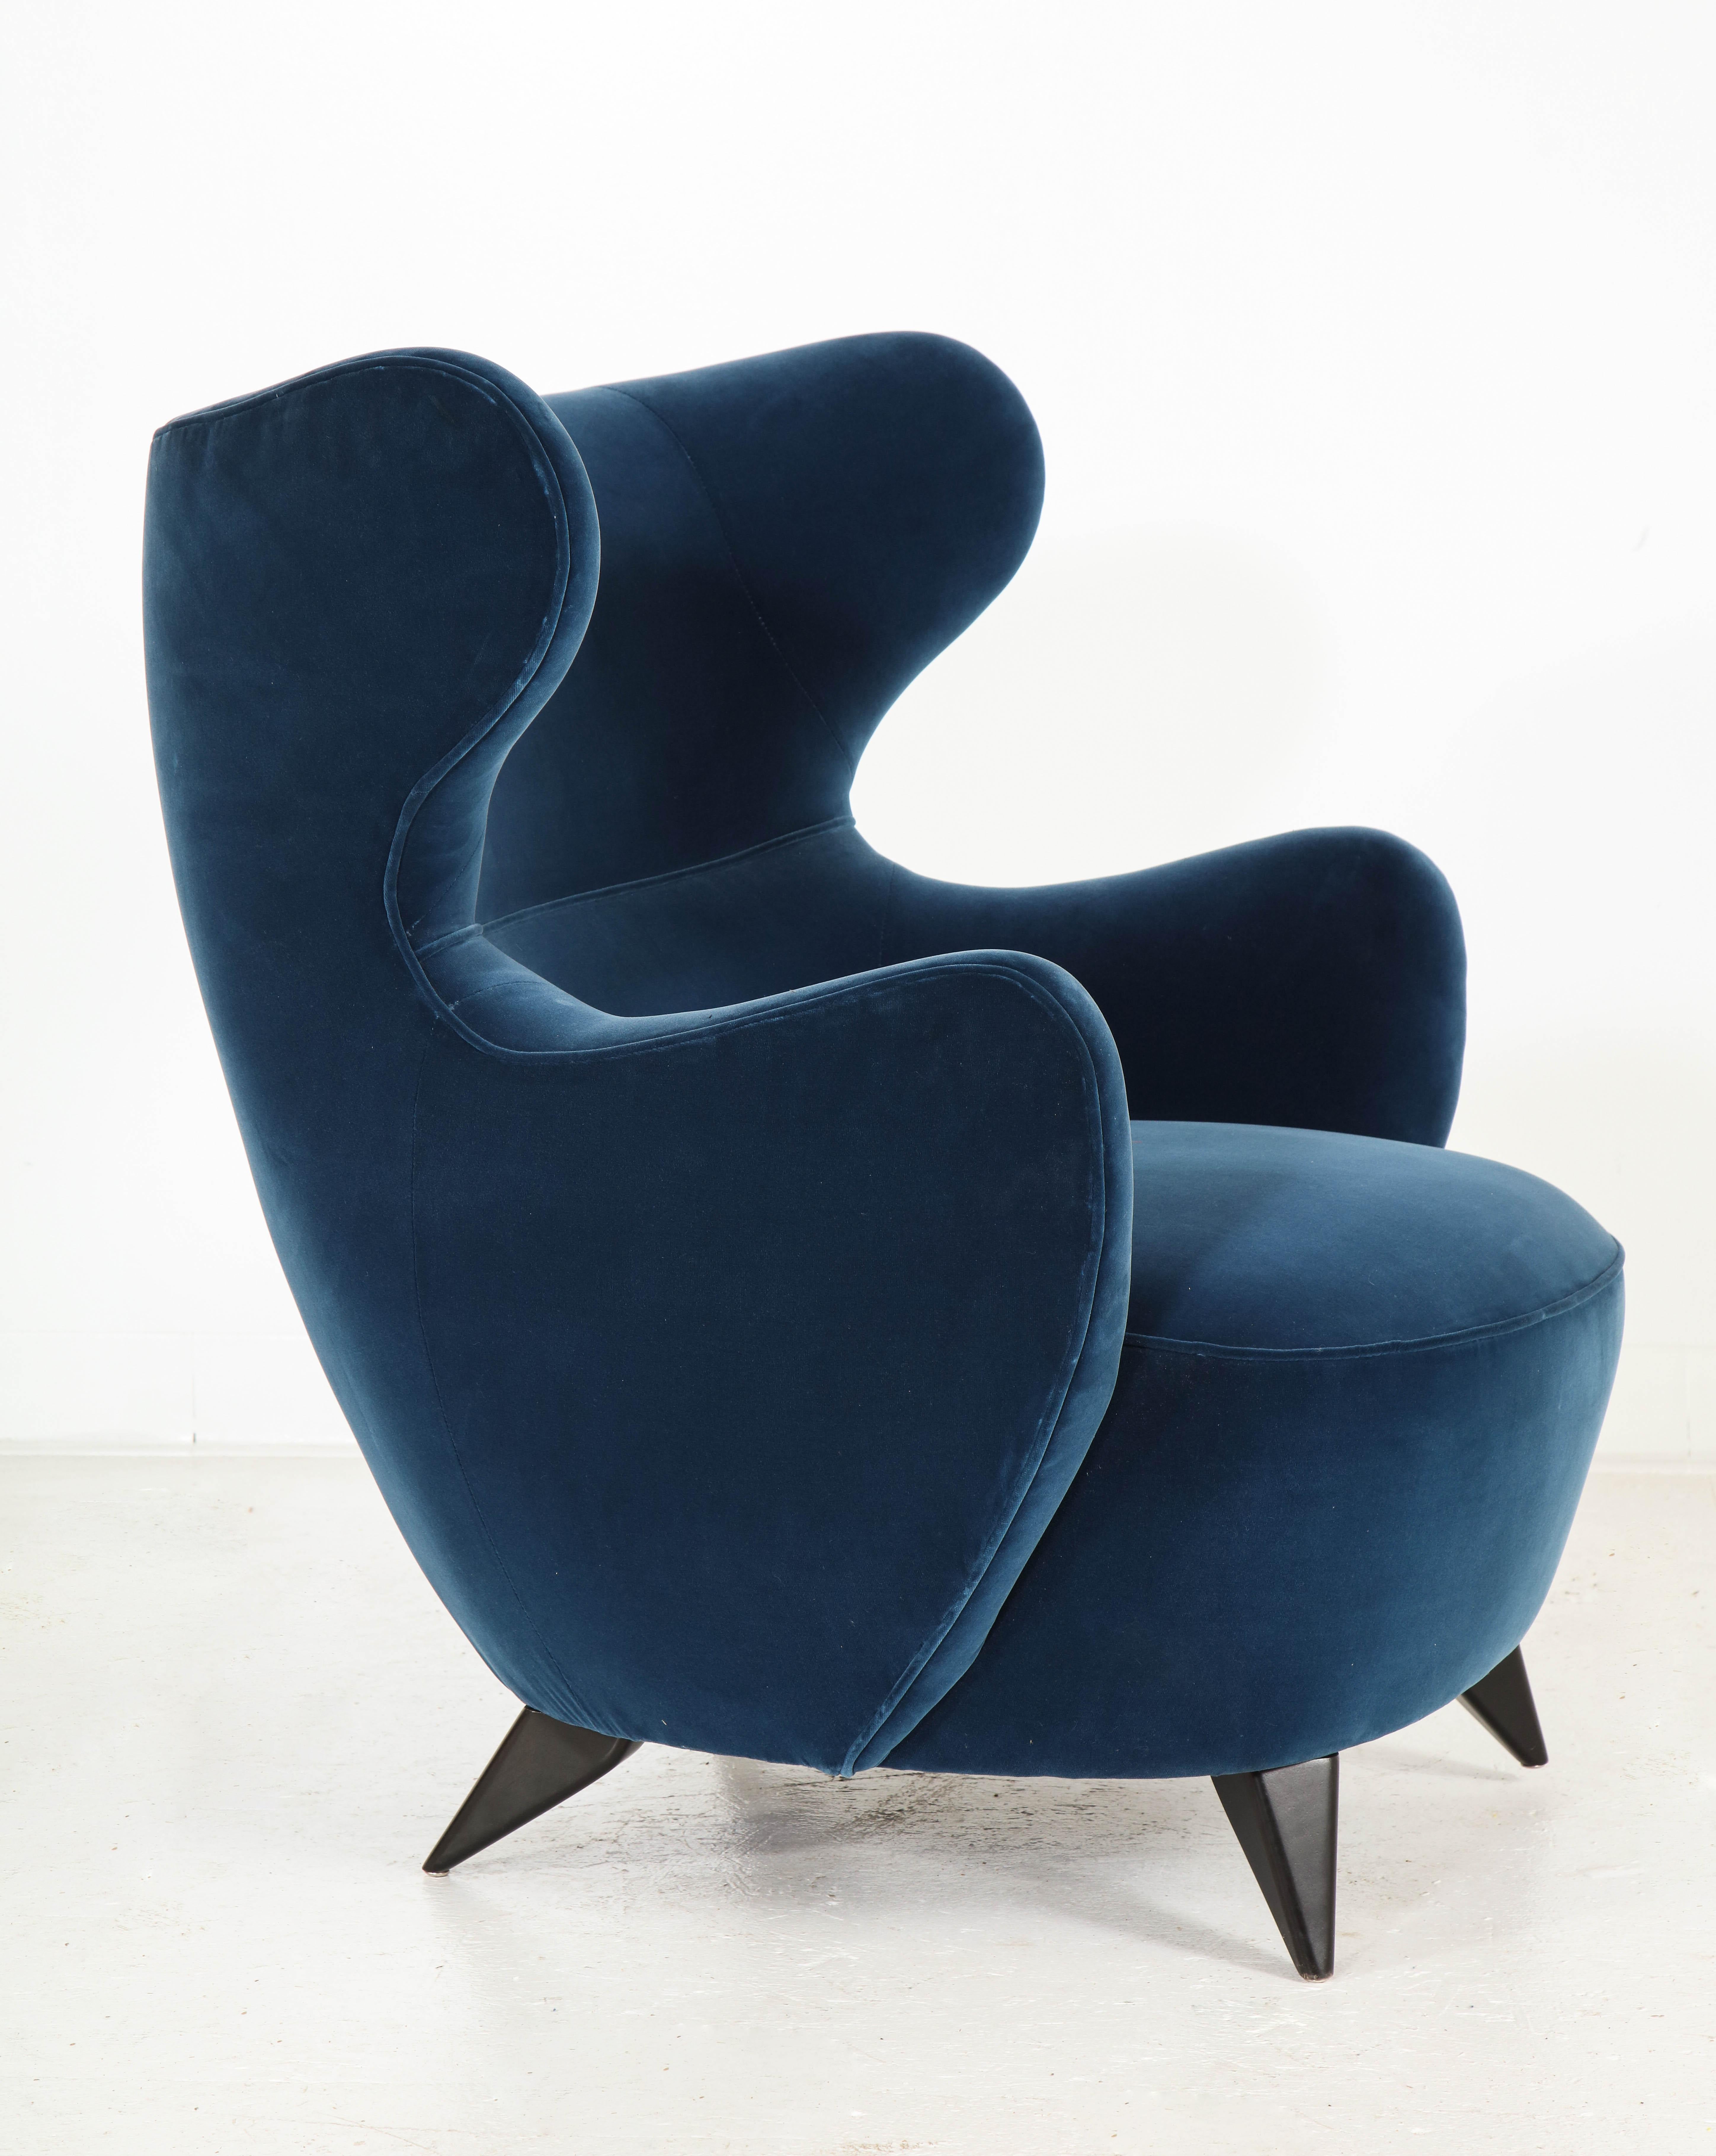 Contemporary Wing Chair in Blue w/ Maple Wood Base Offered by Vladimir Kagan Design Group